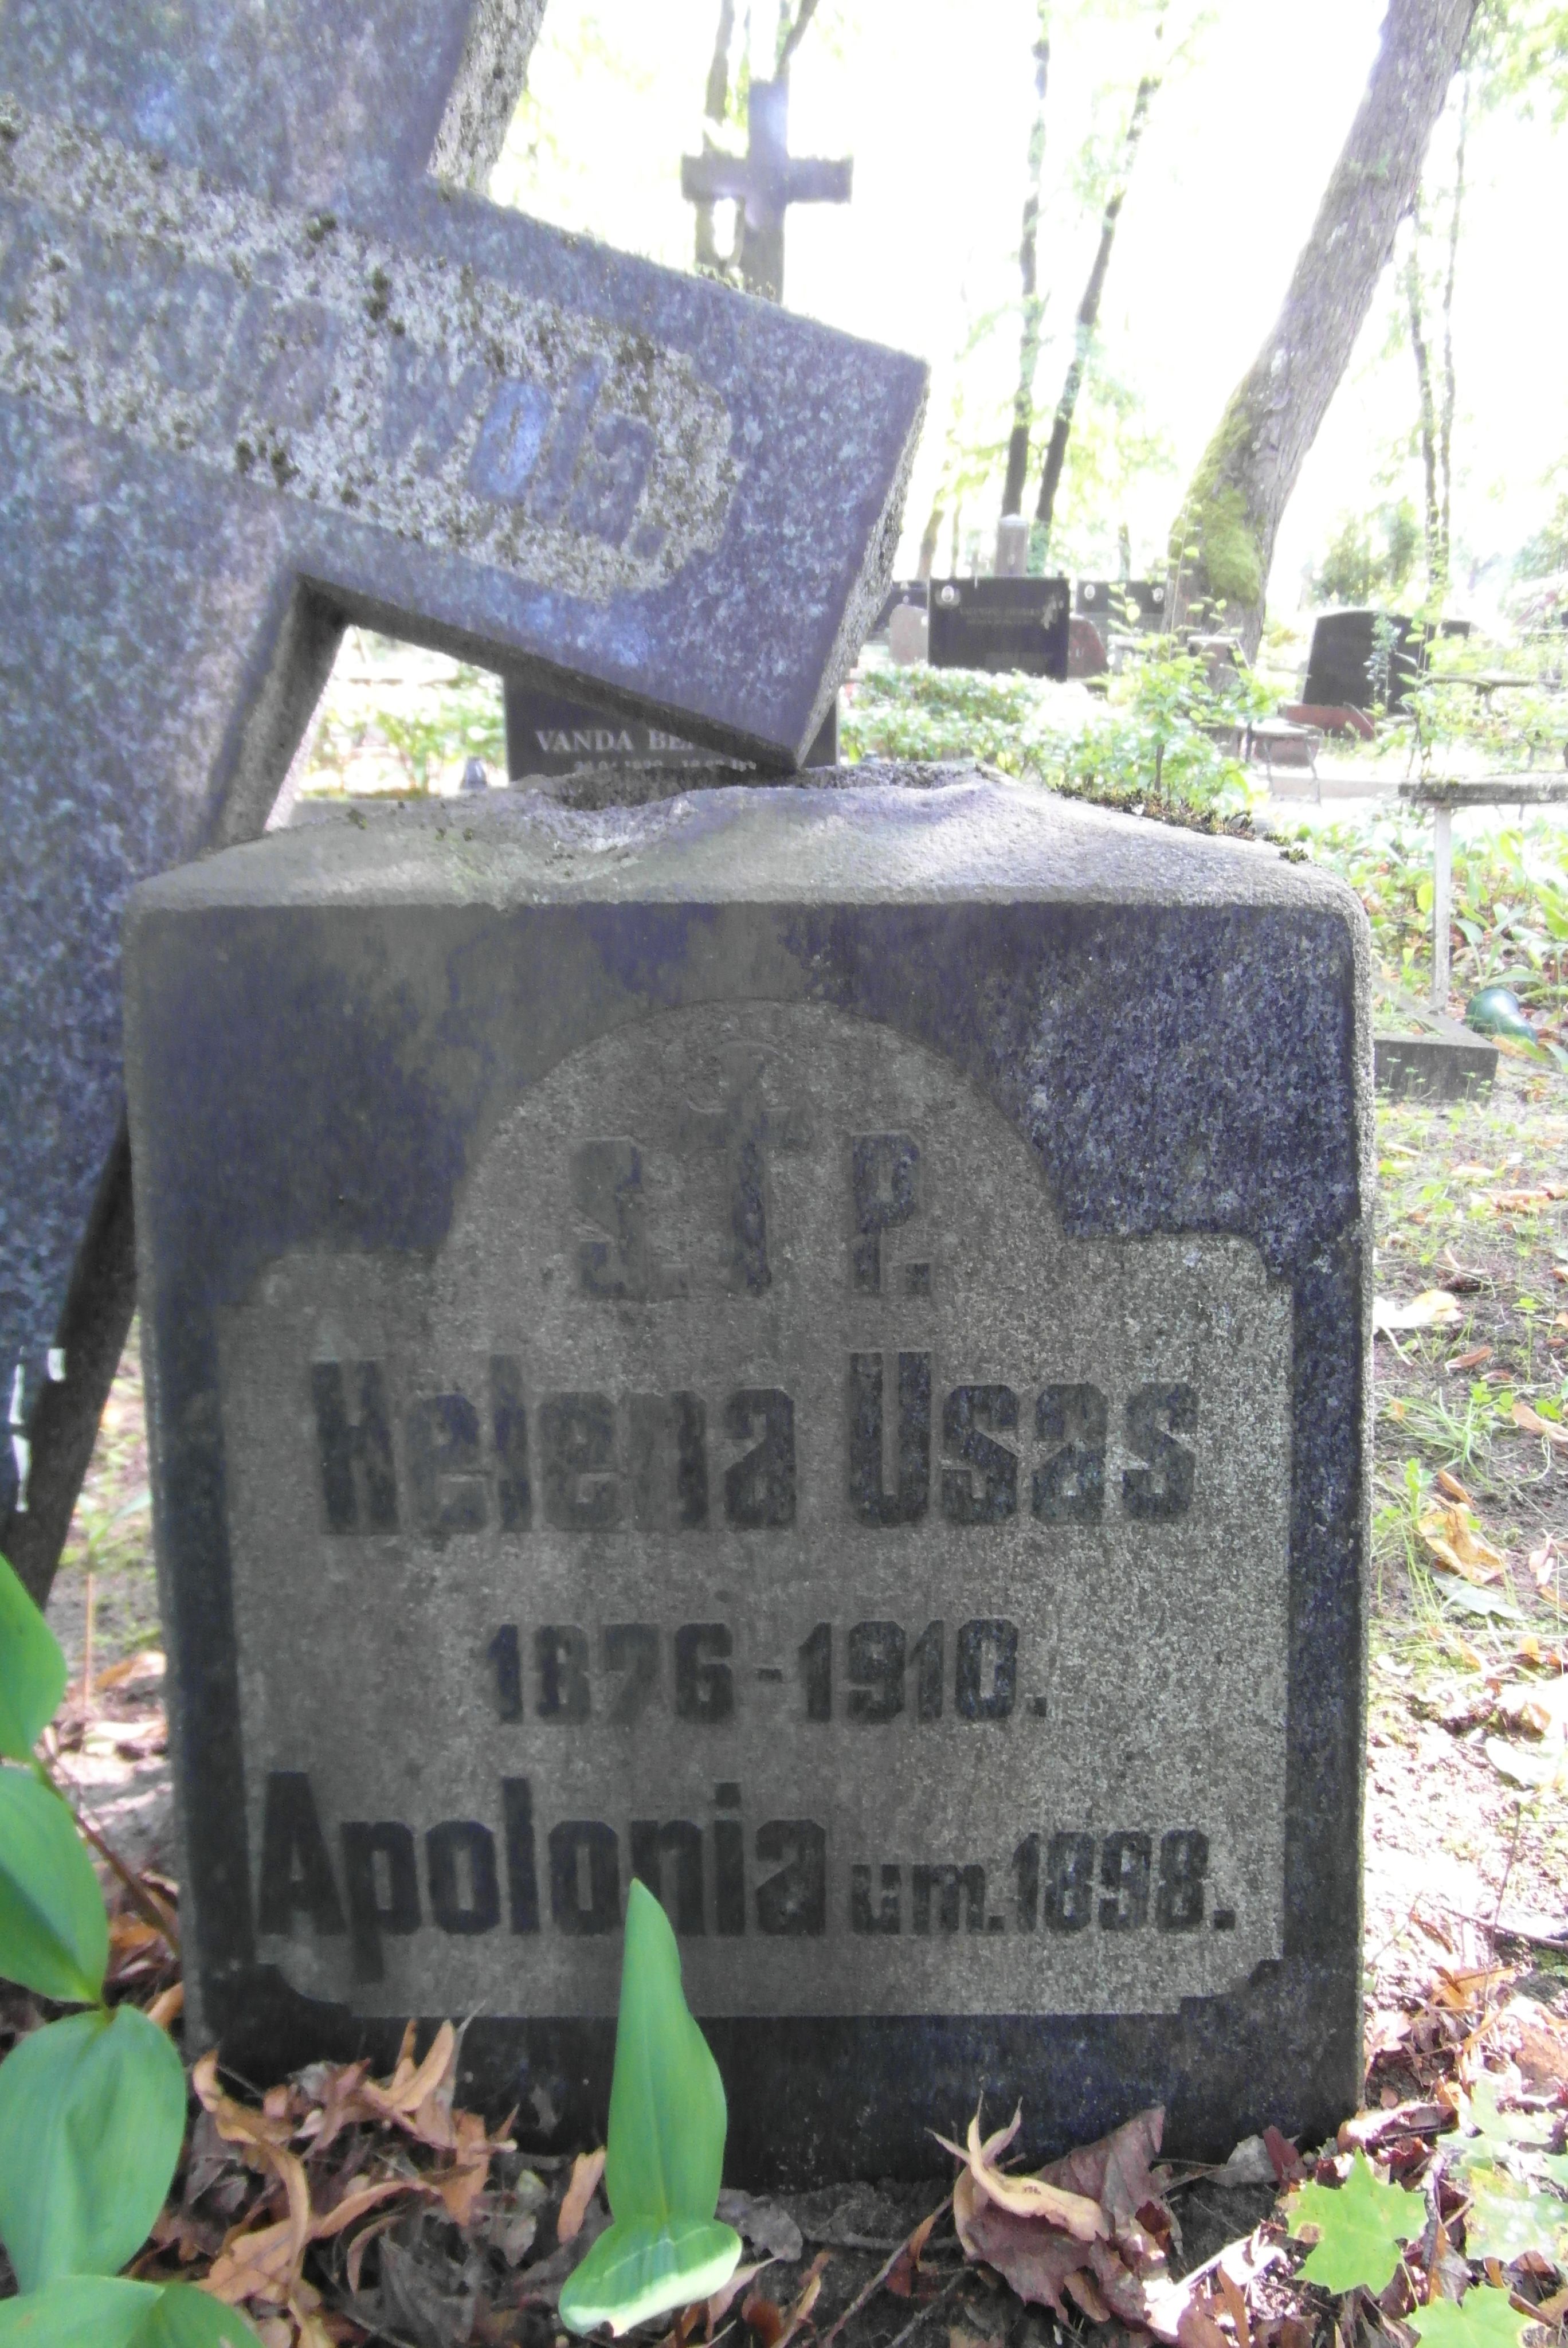 Inscription from the gravestone of Apolonia, Helena Usas, St Michael's Cemetery, Riga, as of 2021.